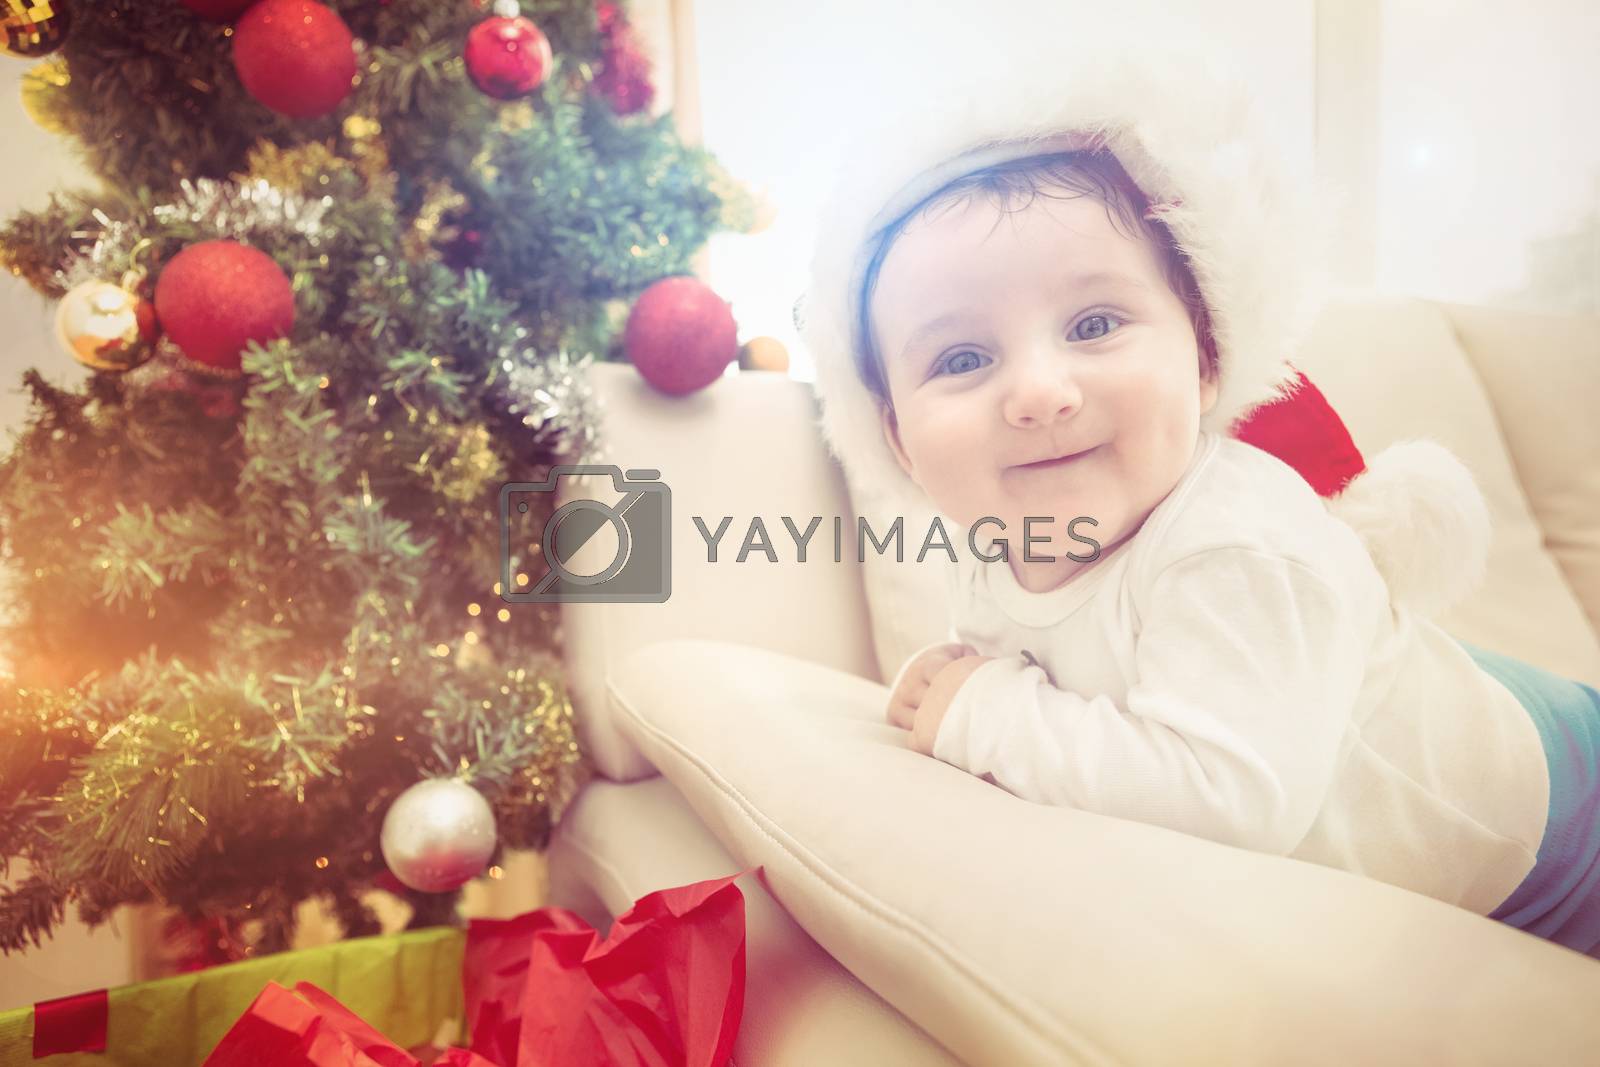 Royalty free image of Cute baby boy on couch at christmas by Wavebreakmedia